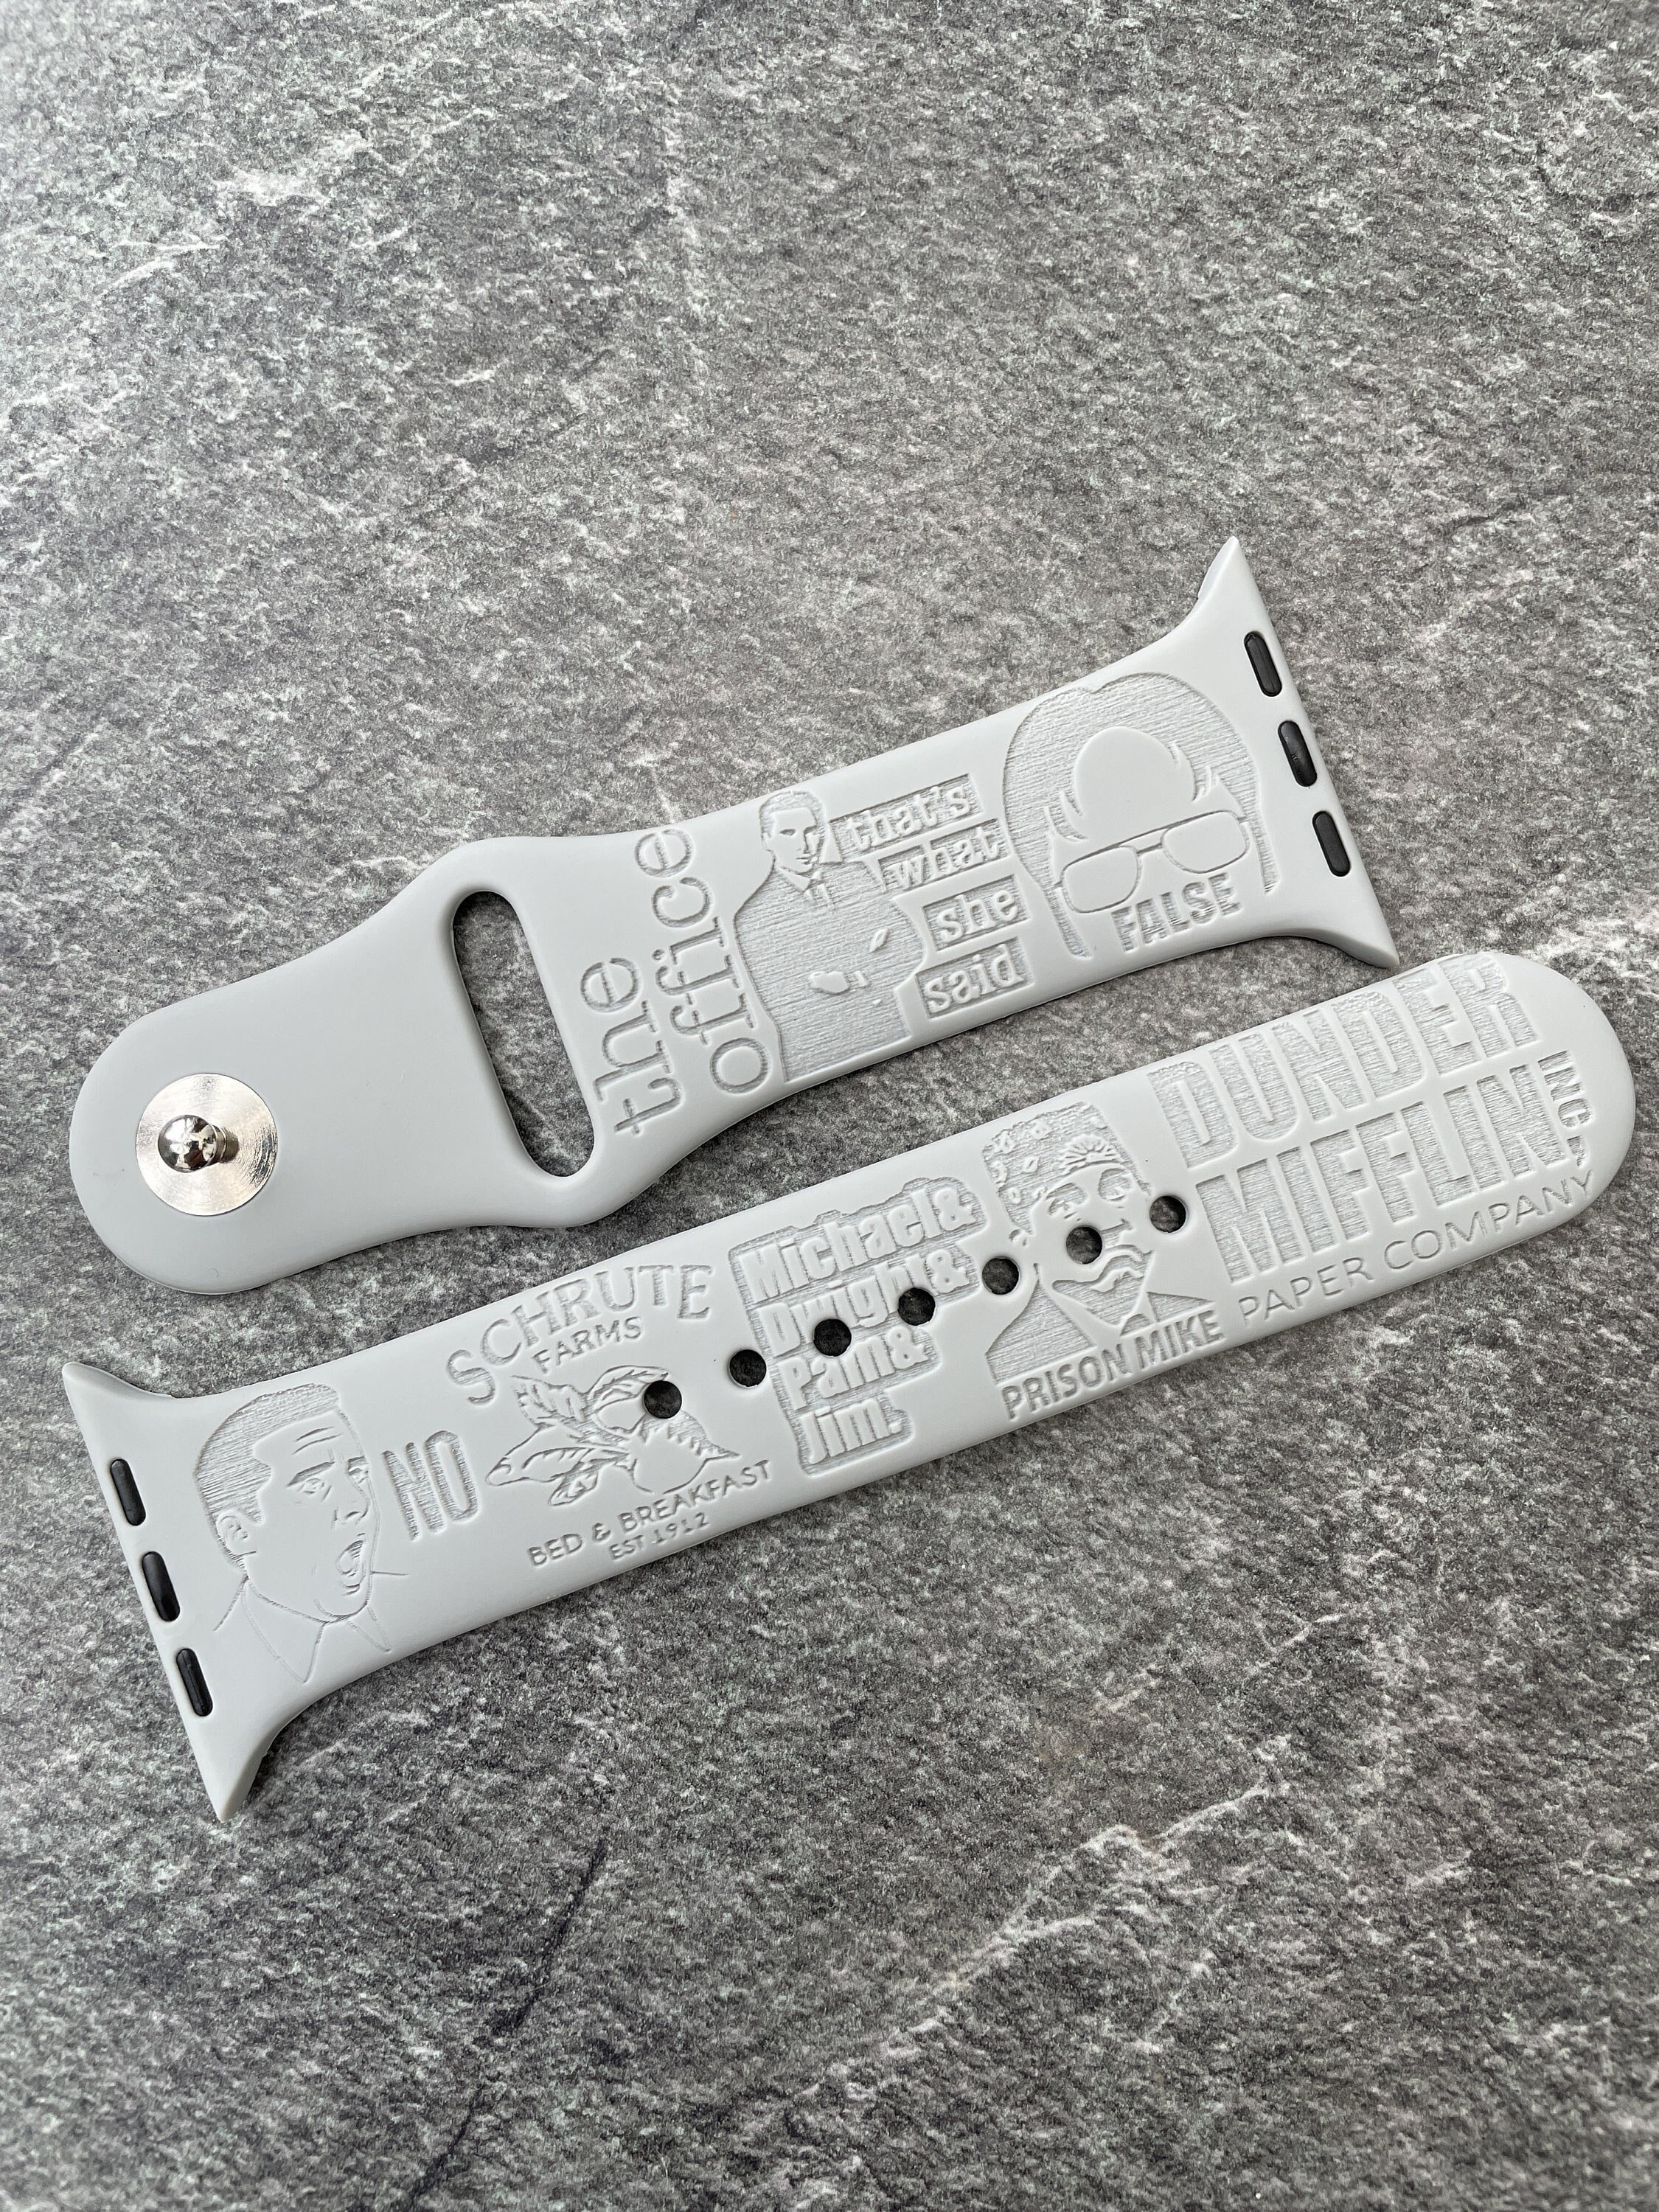 This custom made Louis Vuitton Apple Watch band looks real nice! #applewatch